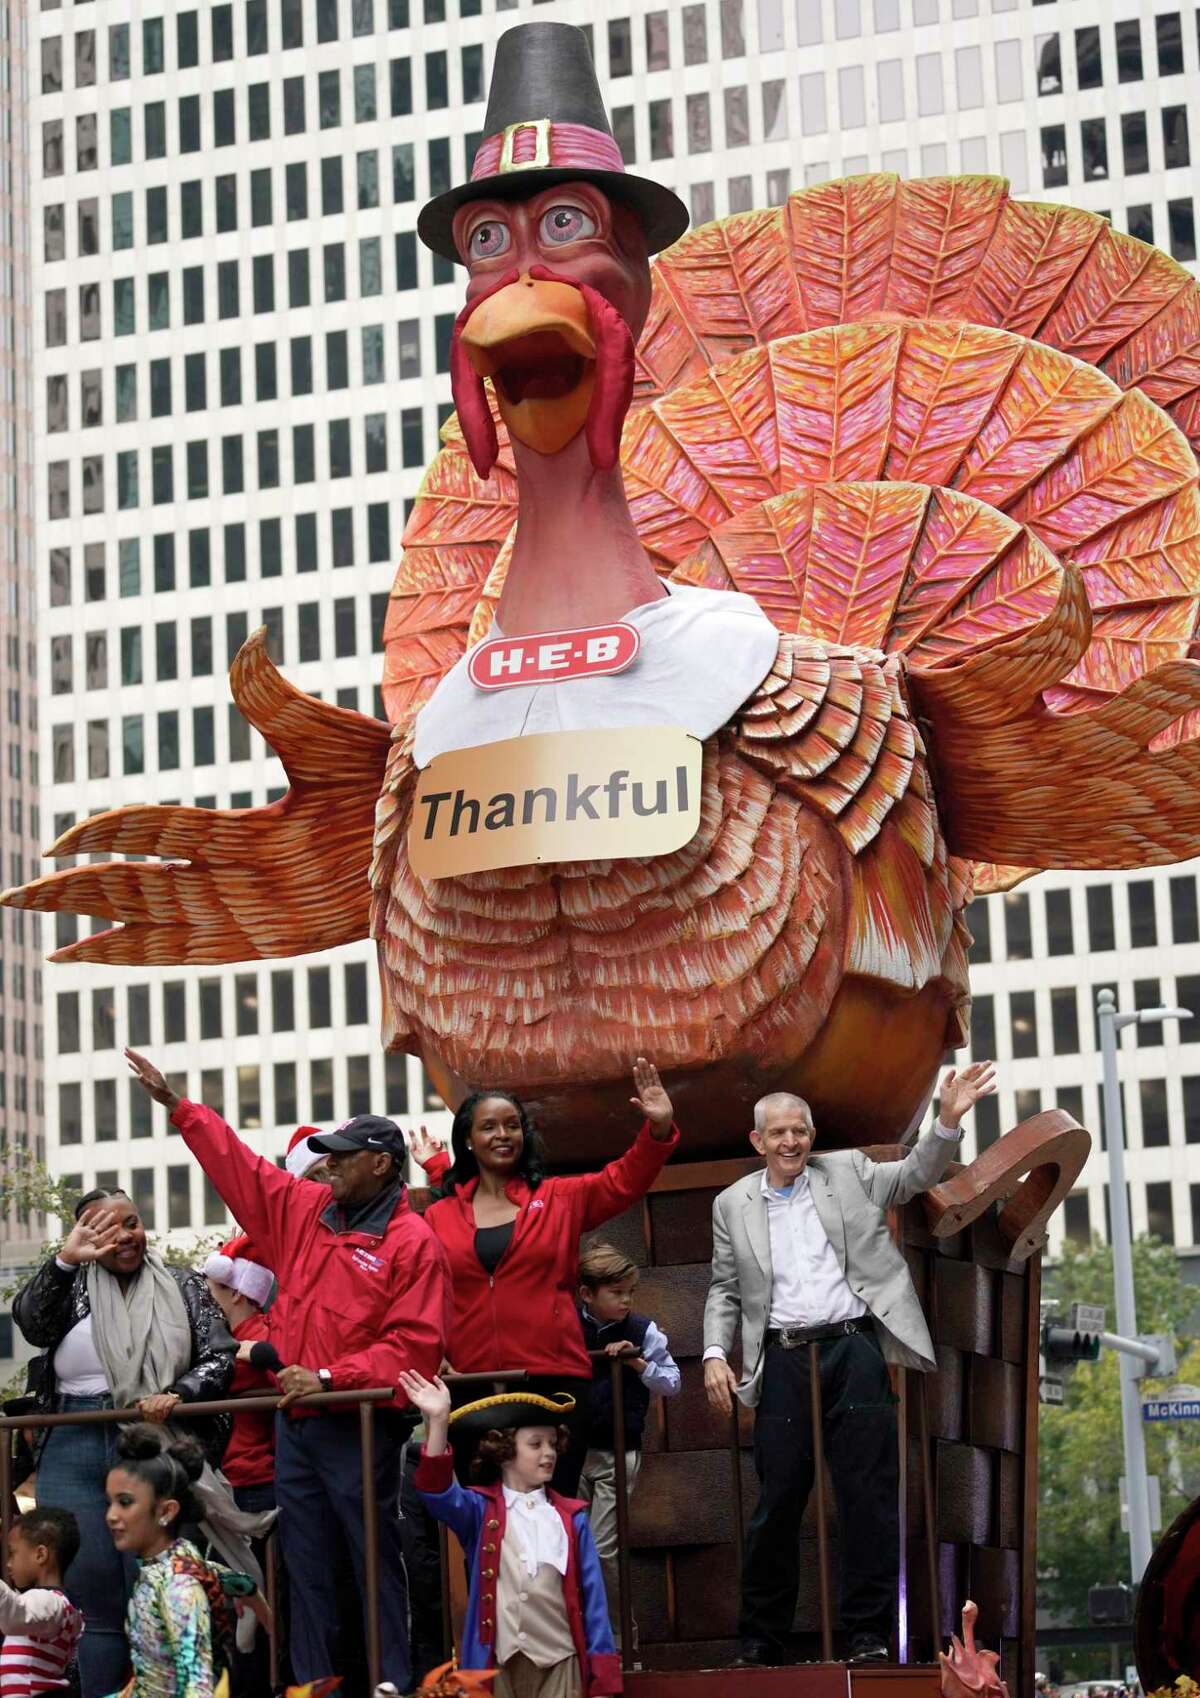 Clouds don’t deter crowds from Houston’s Thanksgiving parade, Big Super